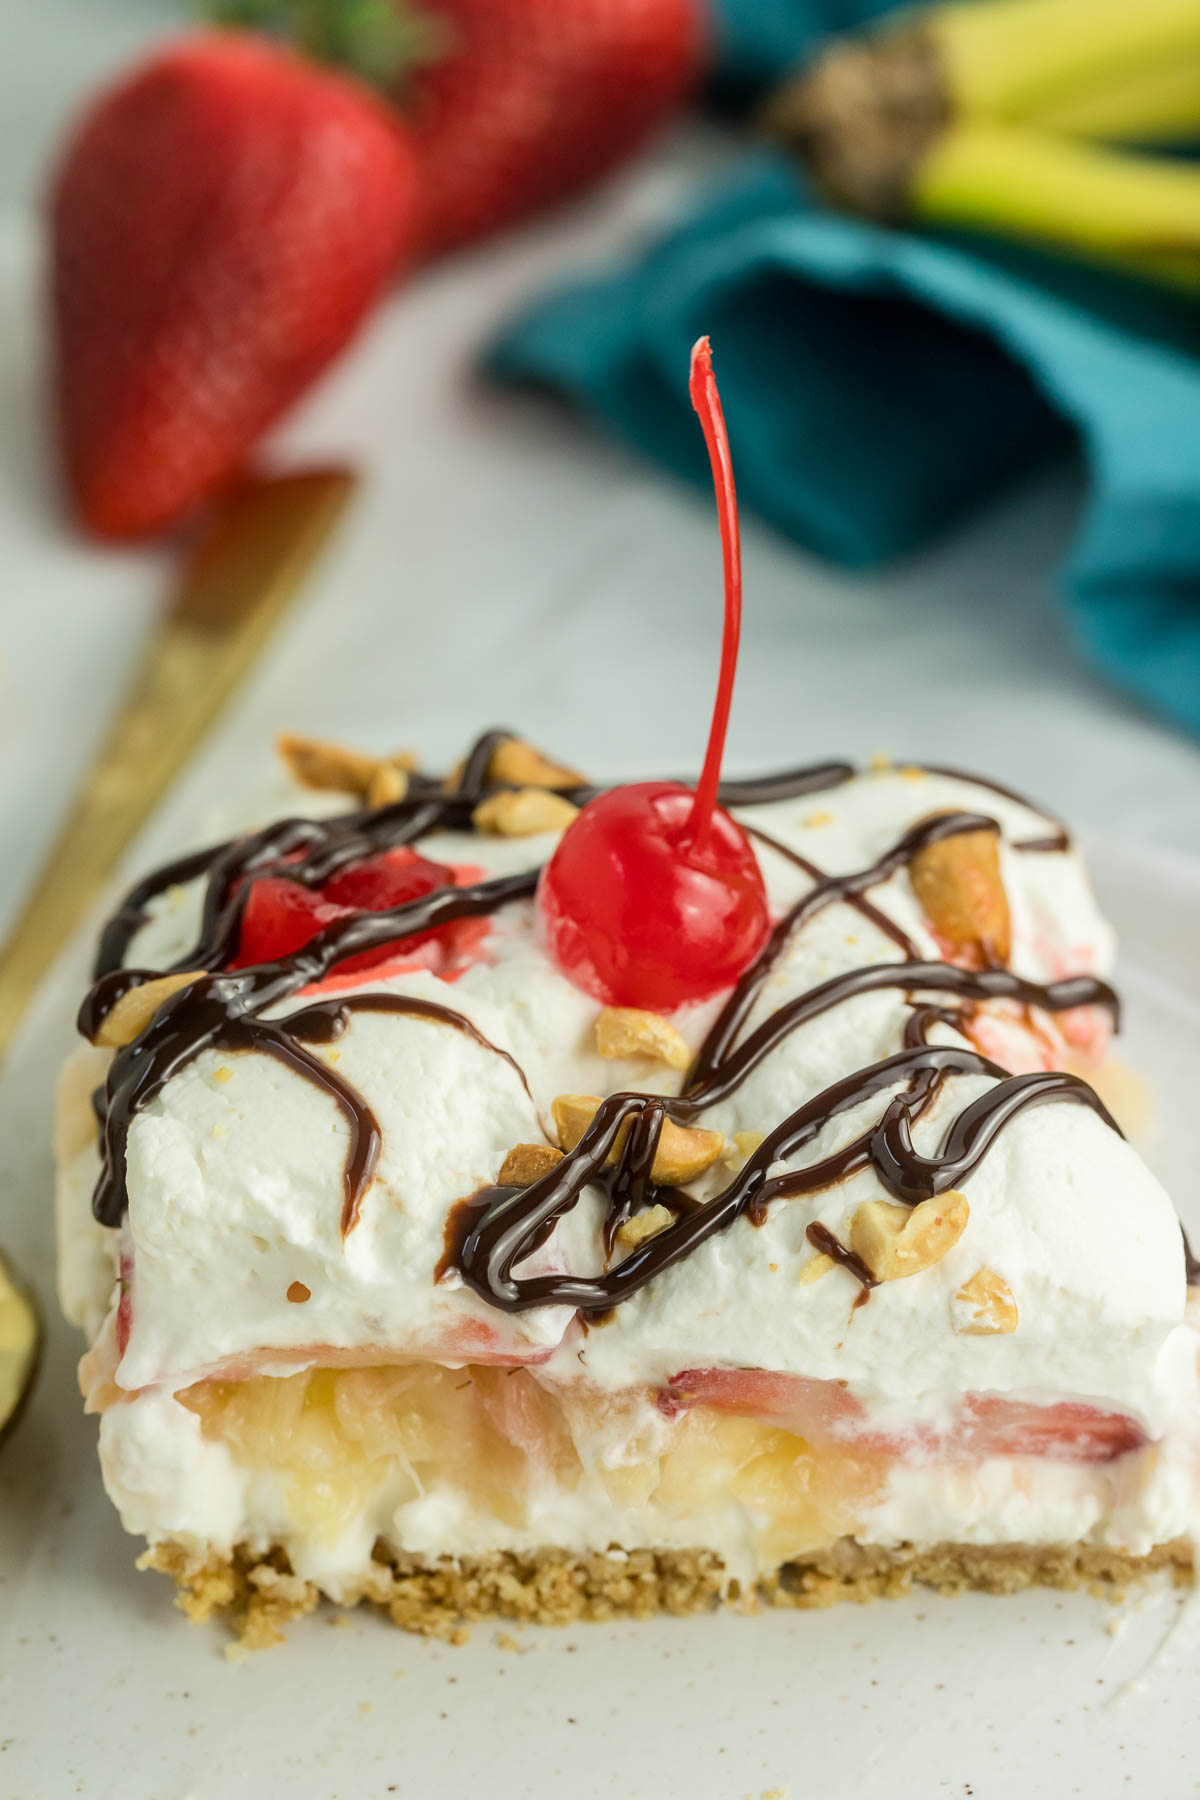 slice of banana split cake on a plate topped with cherry